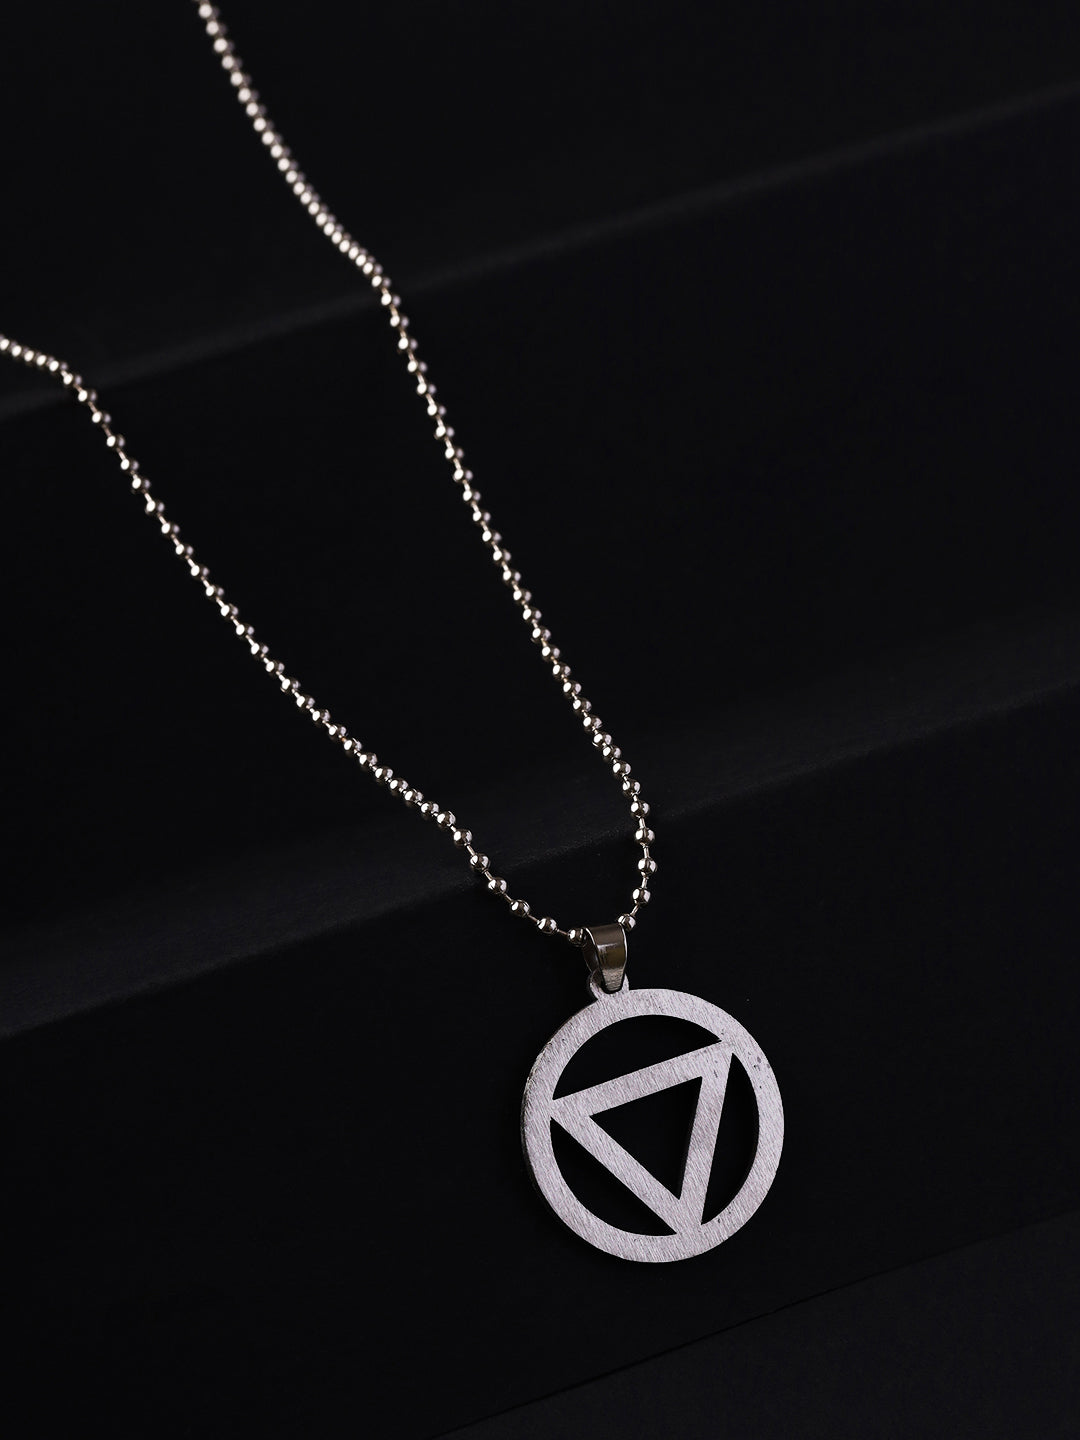 Bold by Priyaasi A Silver Plated Triangle shape Pendant on Chain